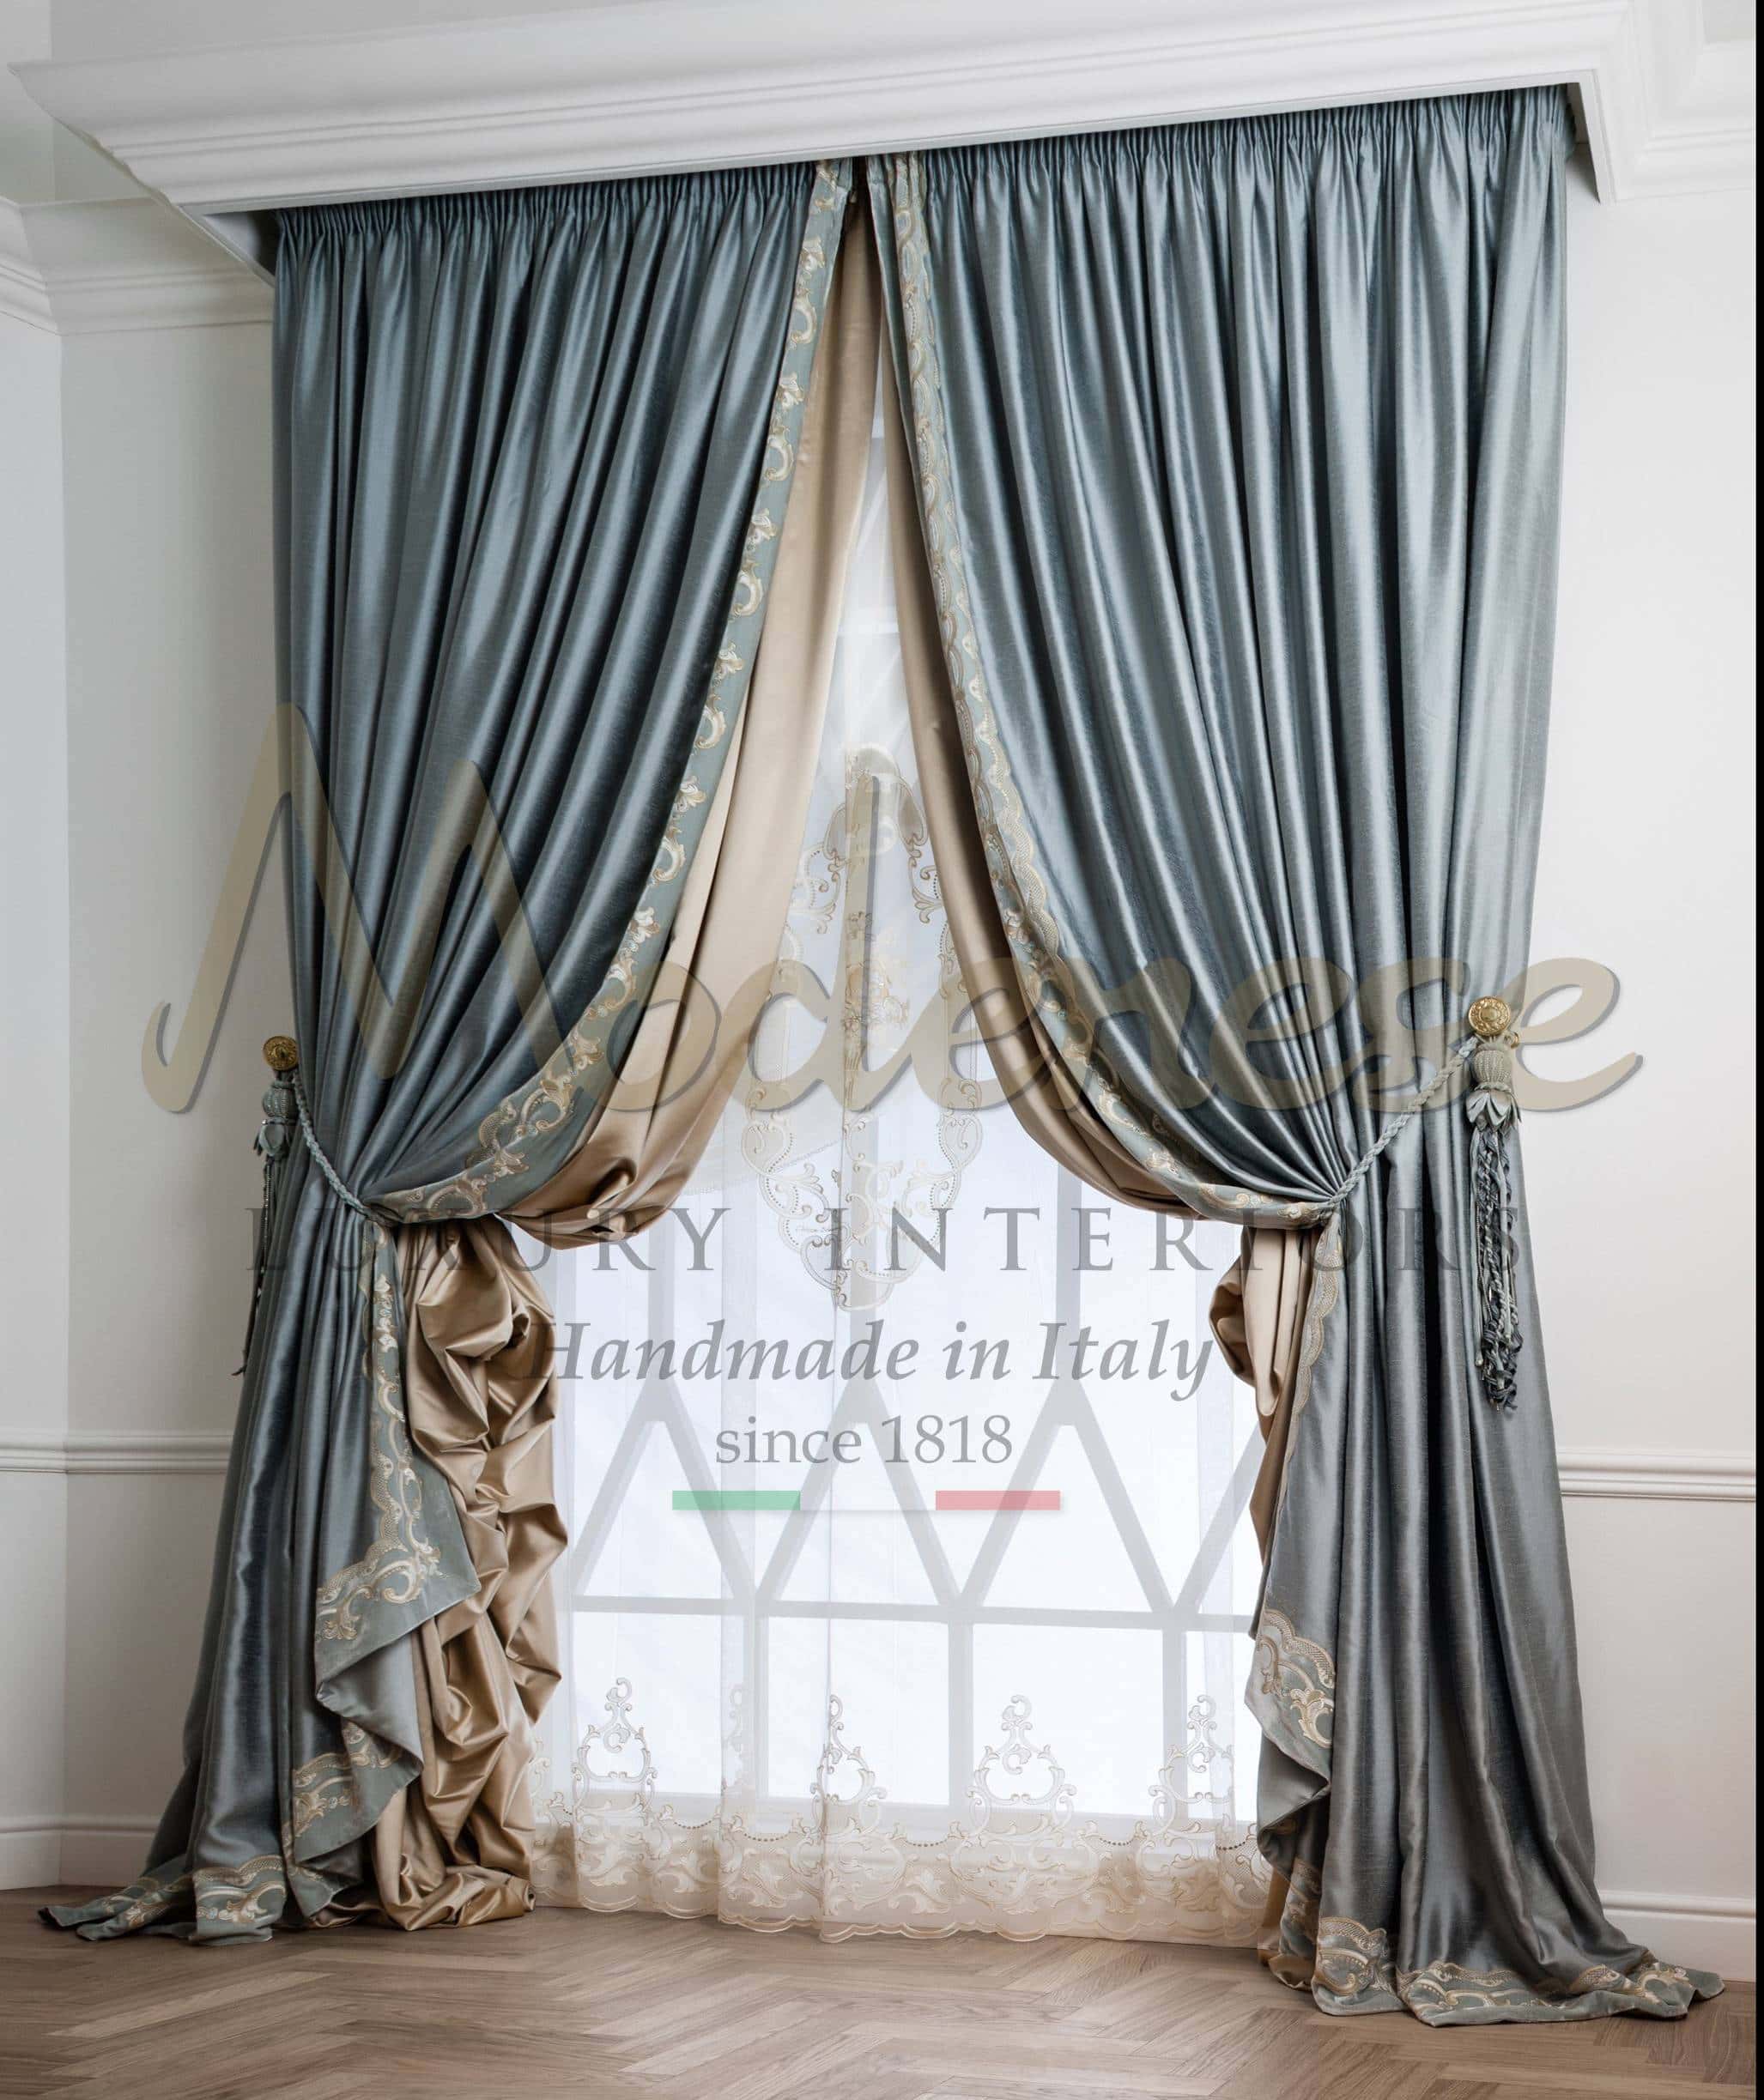 Italian quality fabric design curtains luxury handmade custom-made production classic touch french style home decoration traditional timeless tasteful customized made in Italy opulent curtains